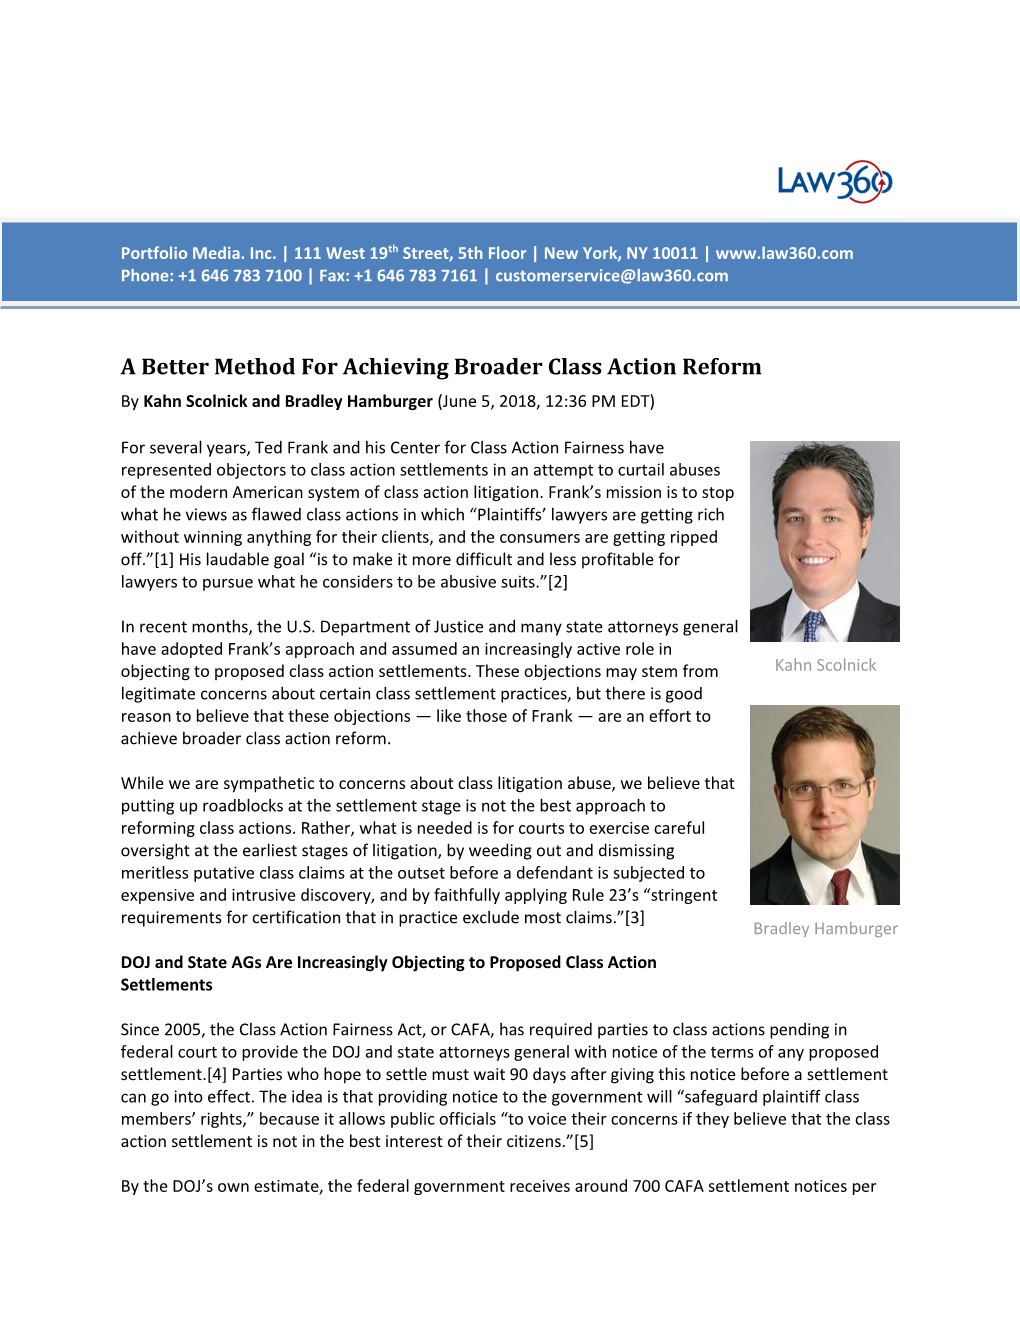 A Better Method for Achieving Broader Class Action Reform by Kahn Scolnick and Bradley Hamburger (June 5, 2018, 12:36 PM EDT)